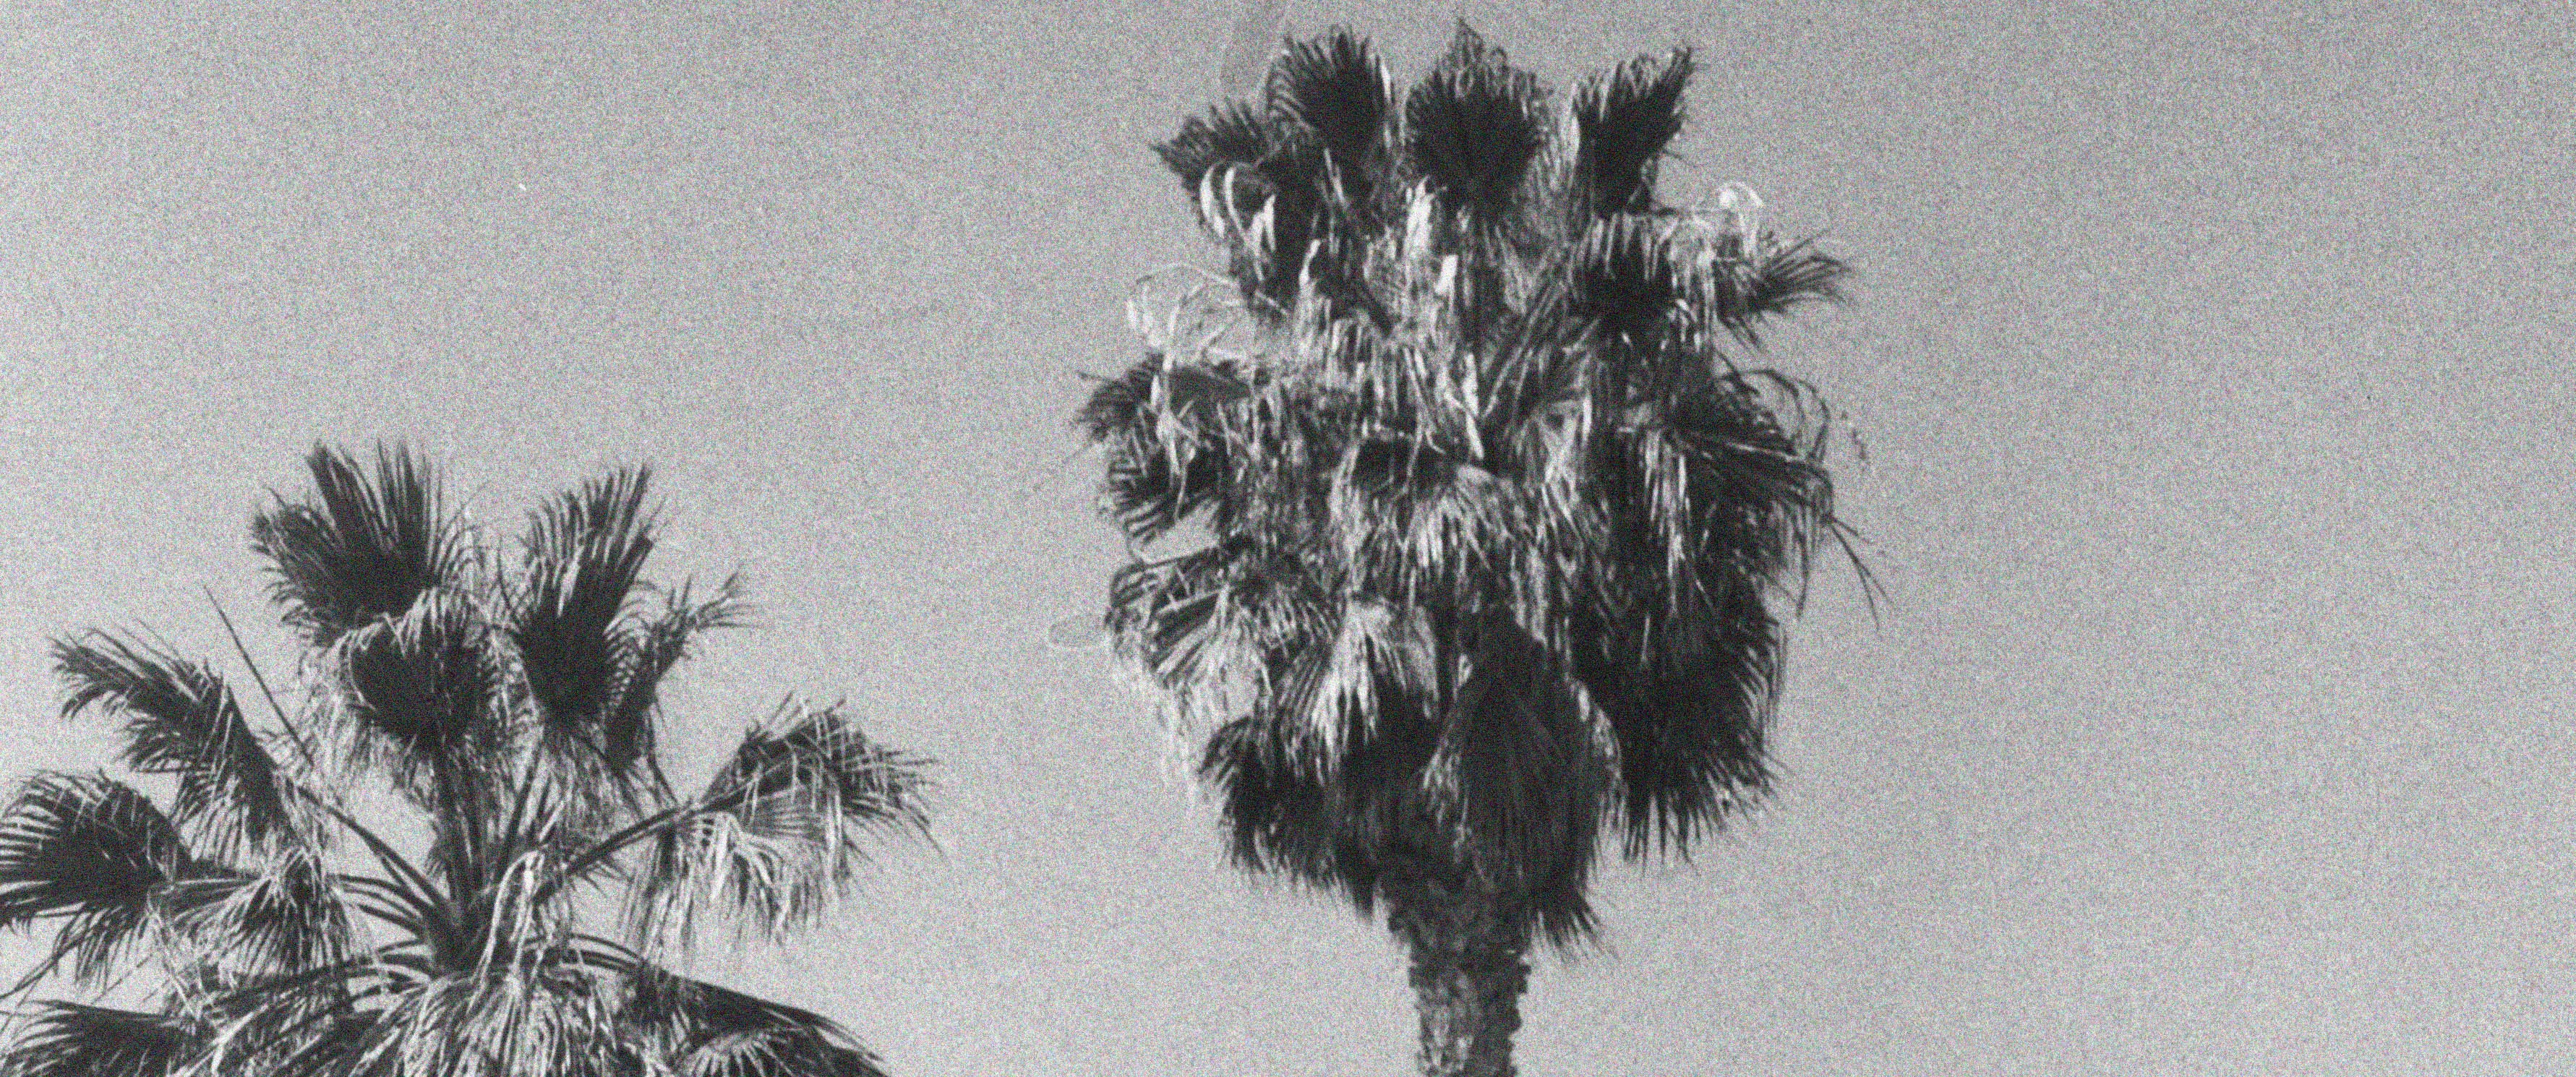 Black and white image of Los Angeles palm trees.